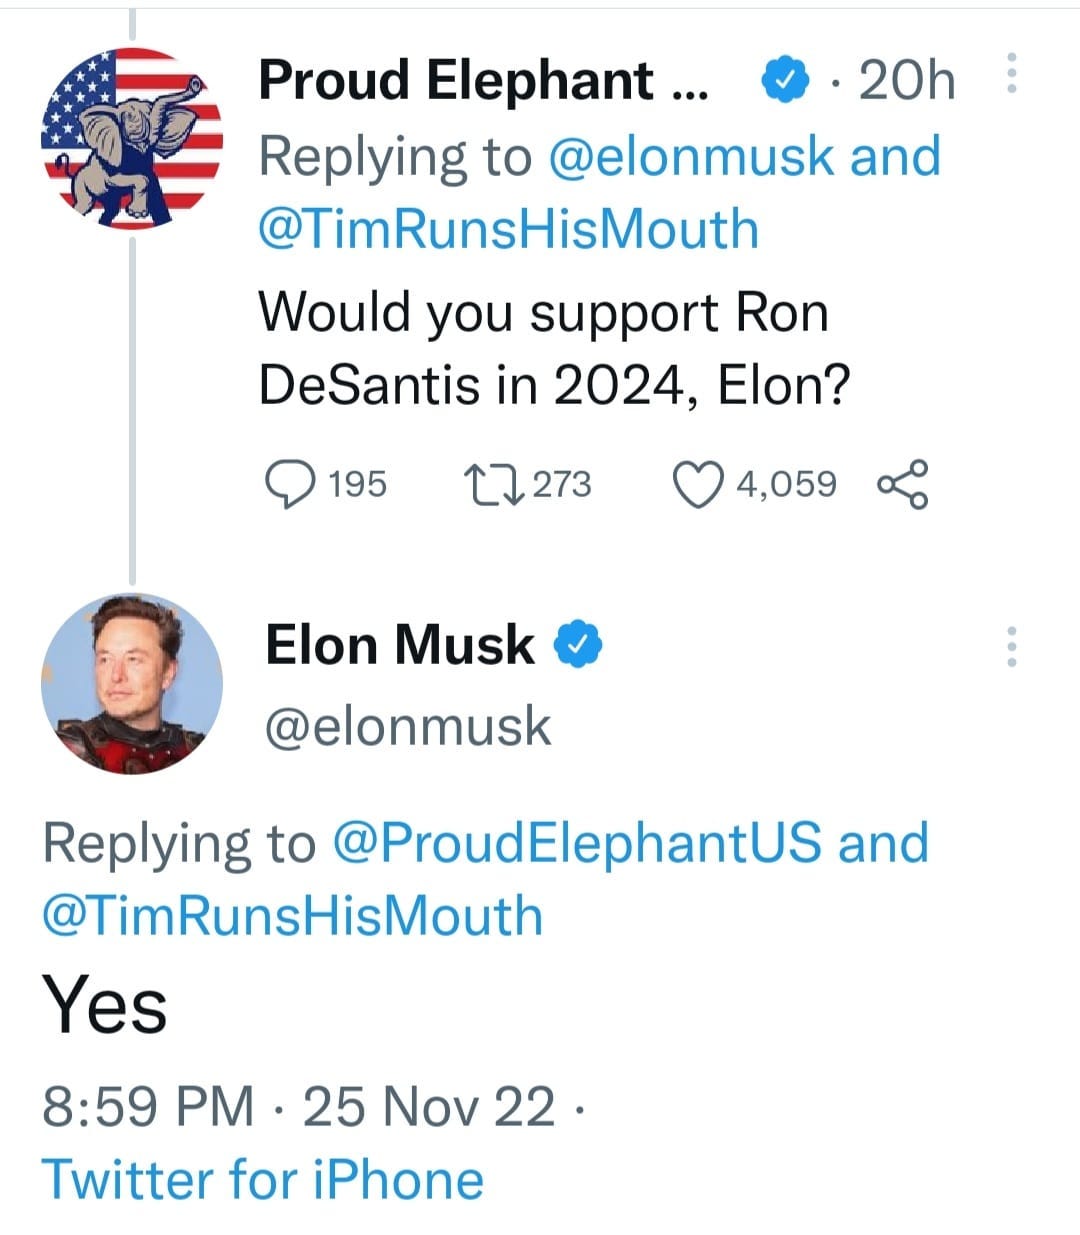 May be a Twitter screenshot of 1 person and text that says 'Proud Elephant... 20h Replying to @elonmusk and @TimRunsHisMouth Would you support Ron DeSantis in 2024, Elon? 195 ↑7273 273 4,059 Elon Musk @elonmusk Replying to @ProudElephantUS and @TimRunsHisMouth Yes 8:59 PM 25 Nov 22. Twitter for iPhone'